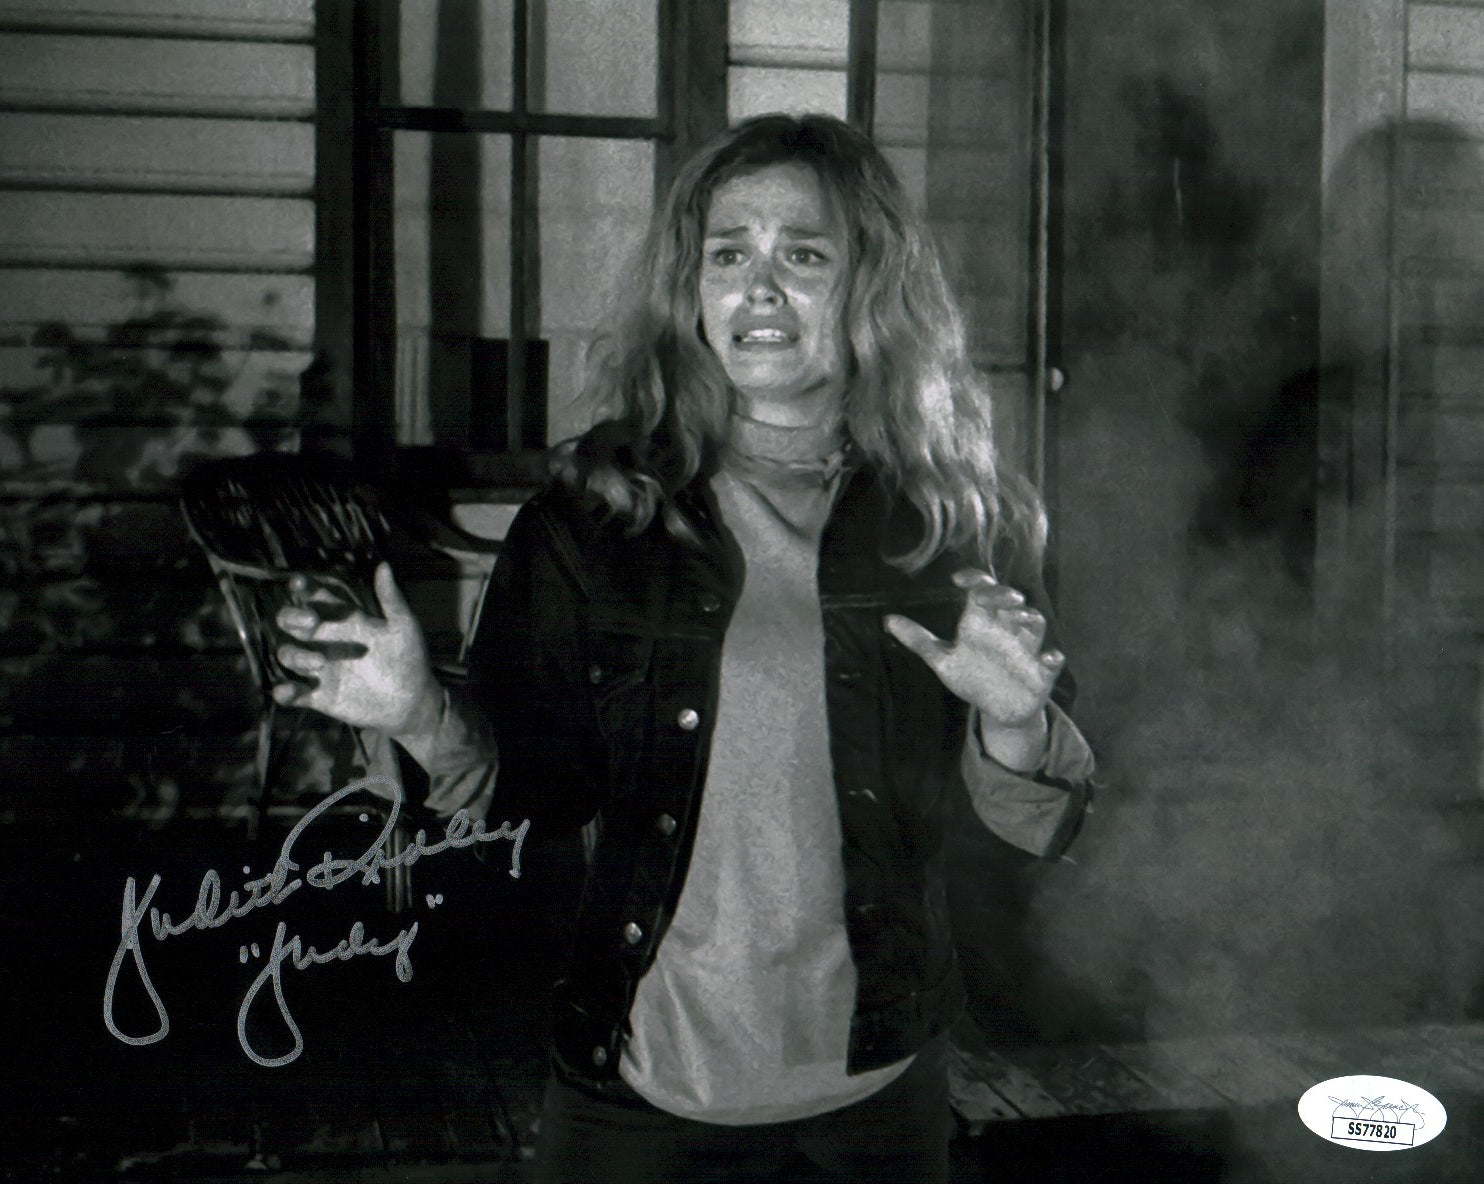 Judith Ridley Night of the Living Dead 8x10 Photo Signed Autograph JSA Certified COA